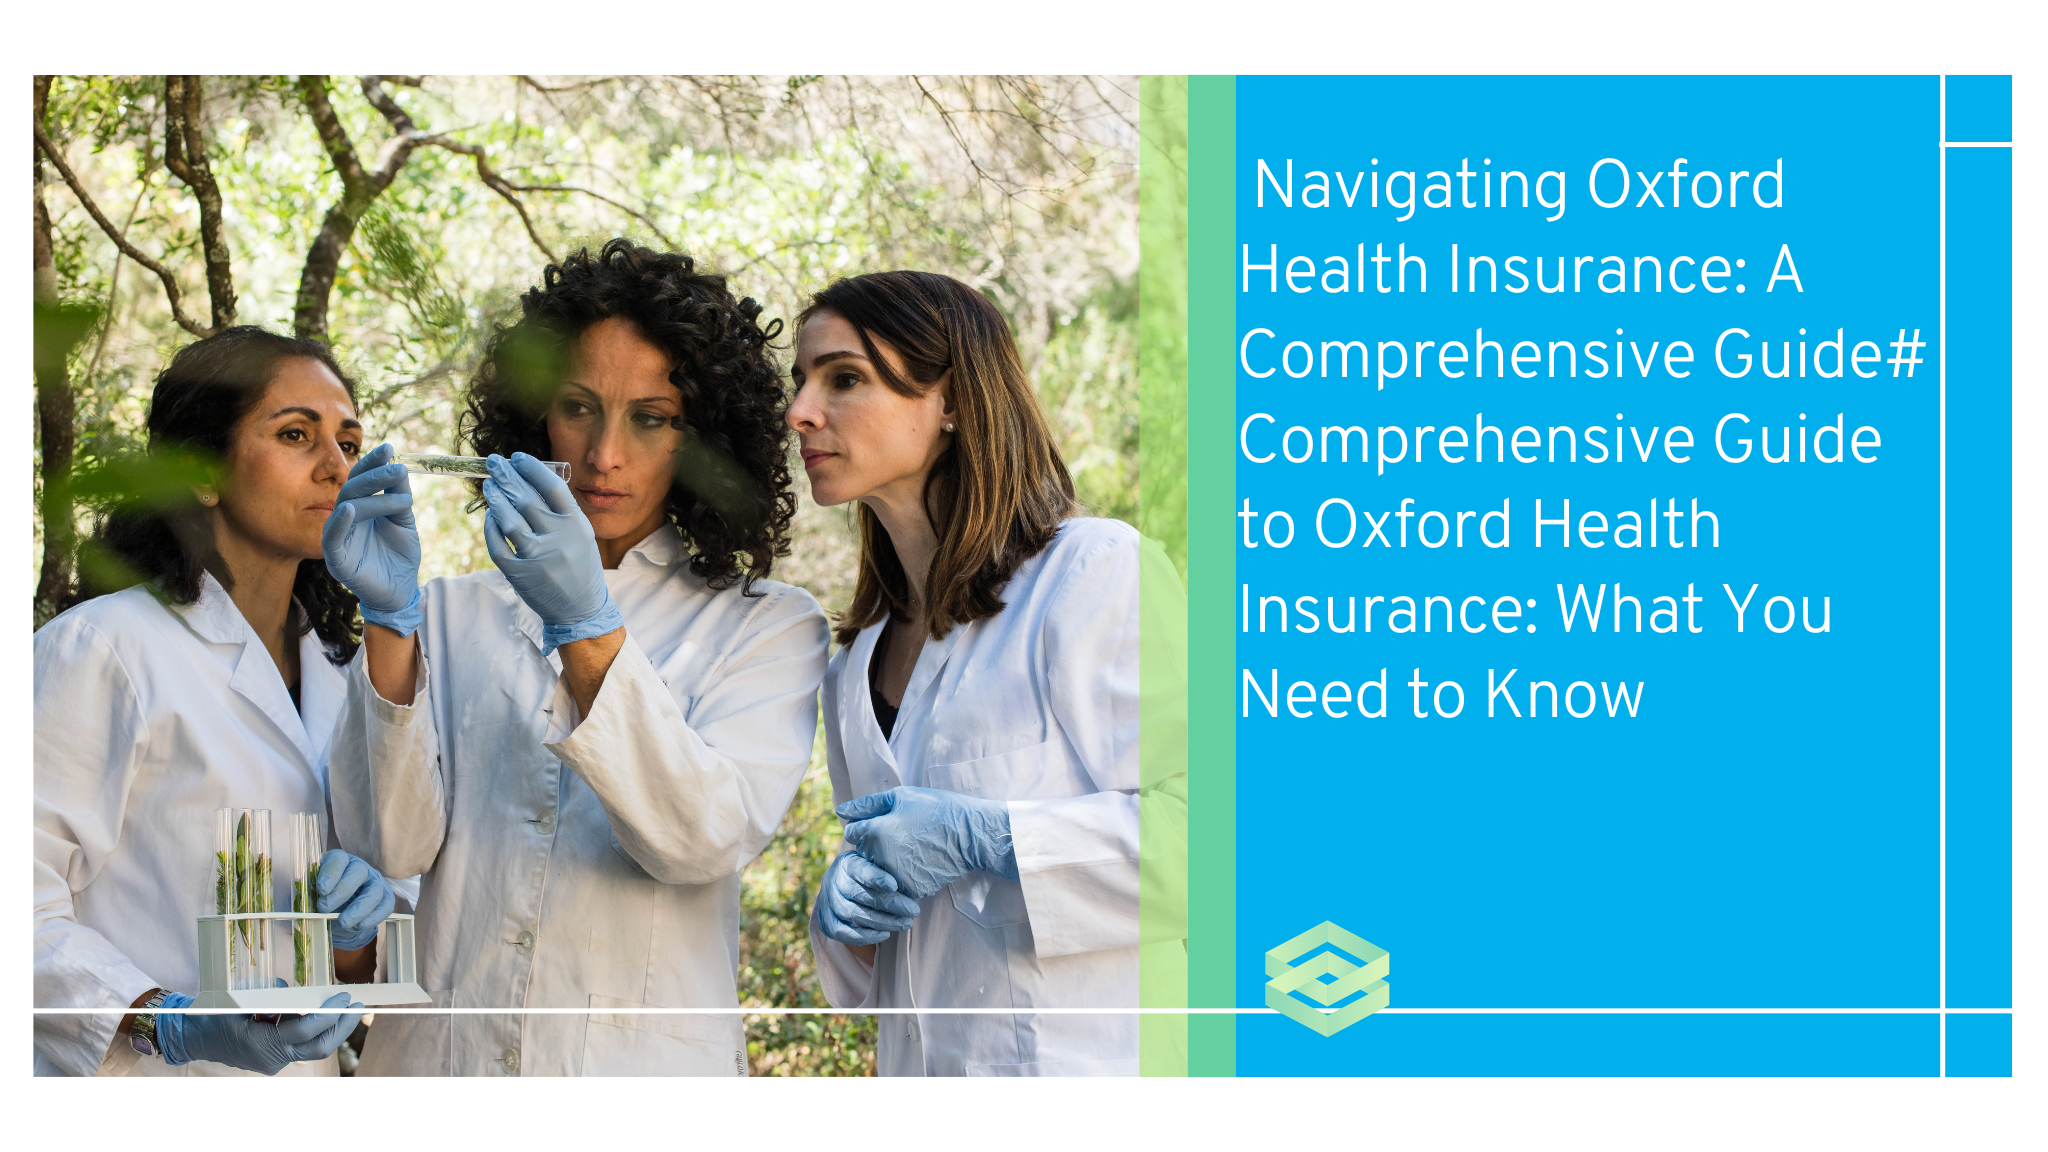 Navigating Oxford Health Insurance: A Comprehensive Guide# Comprehensive Guide to Oxford Health Insurance: What You Need to Know